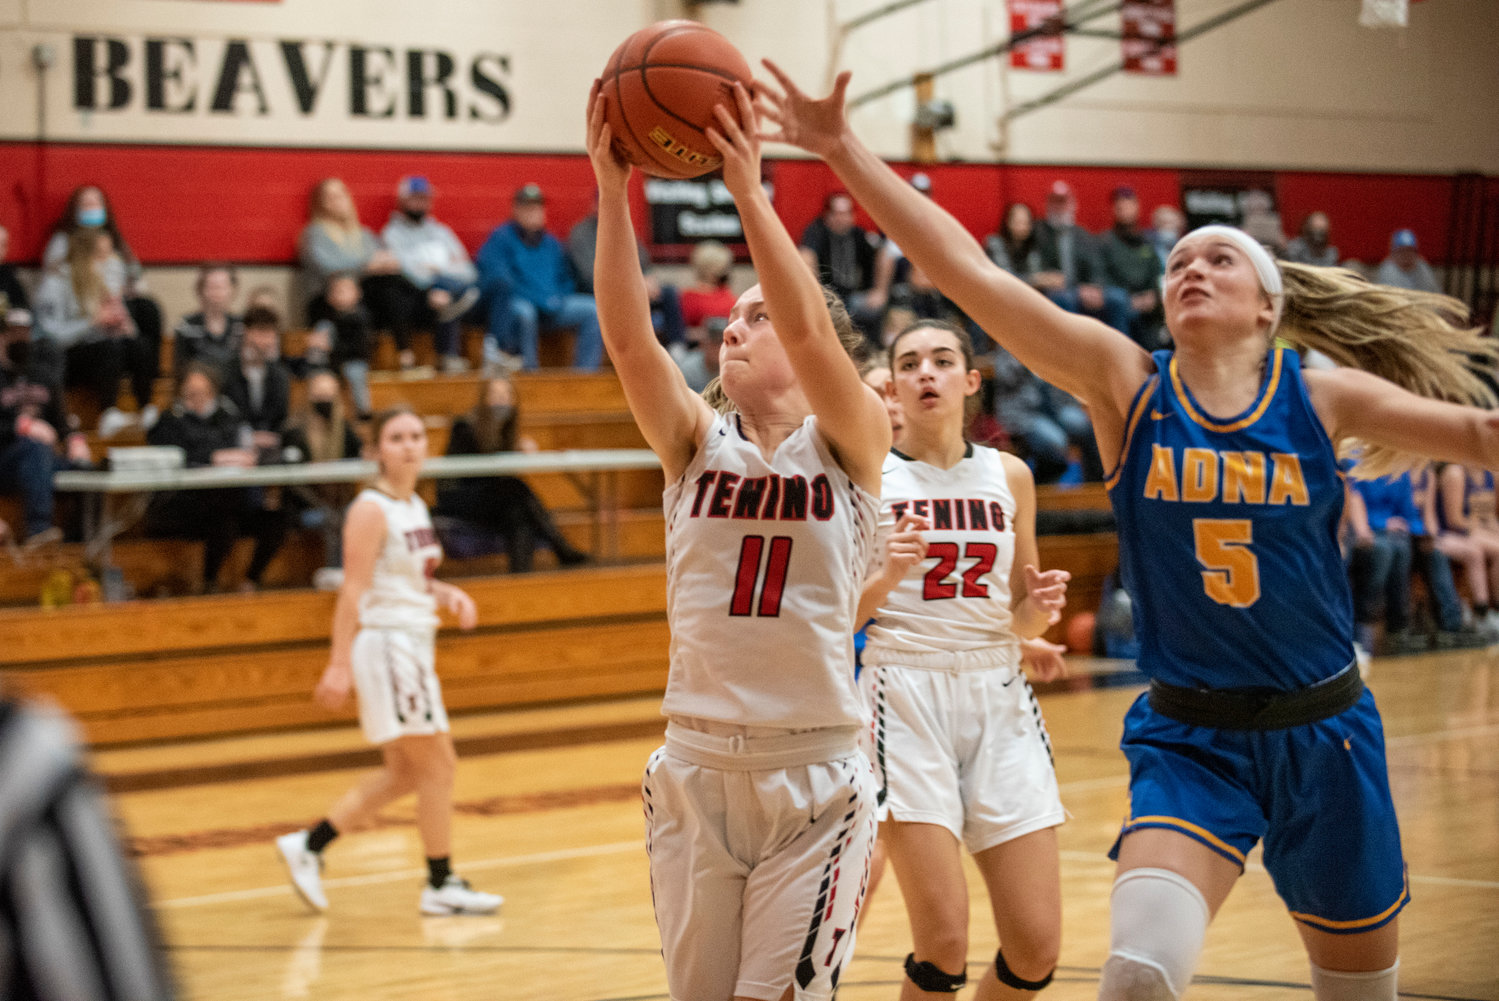 Tenino's Megan Letts (11) receives a pass just out of reach of Adna's Kaylin Todd (5) on Dec. 14.